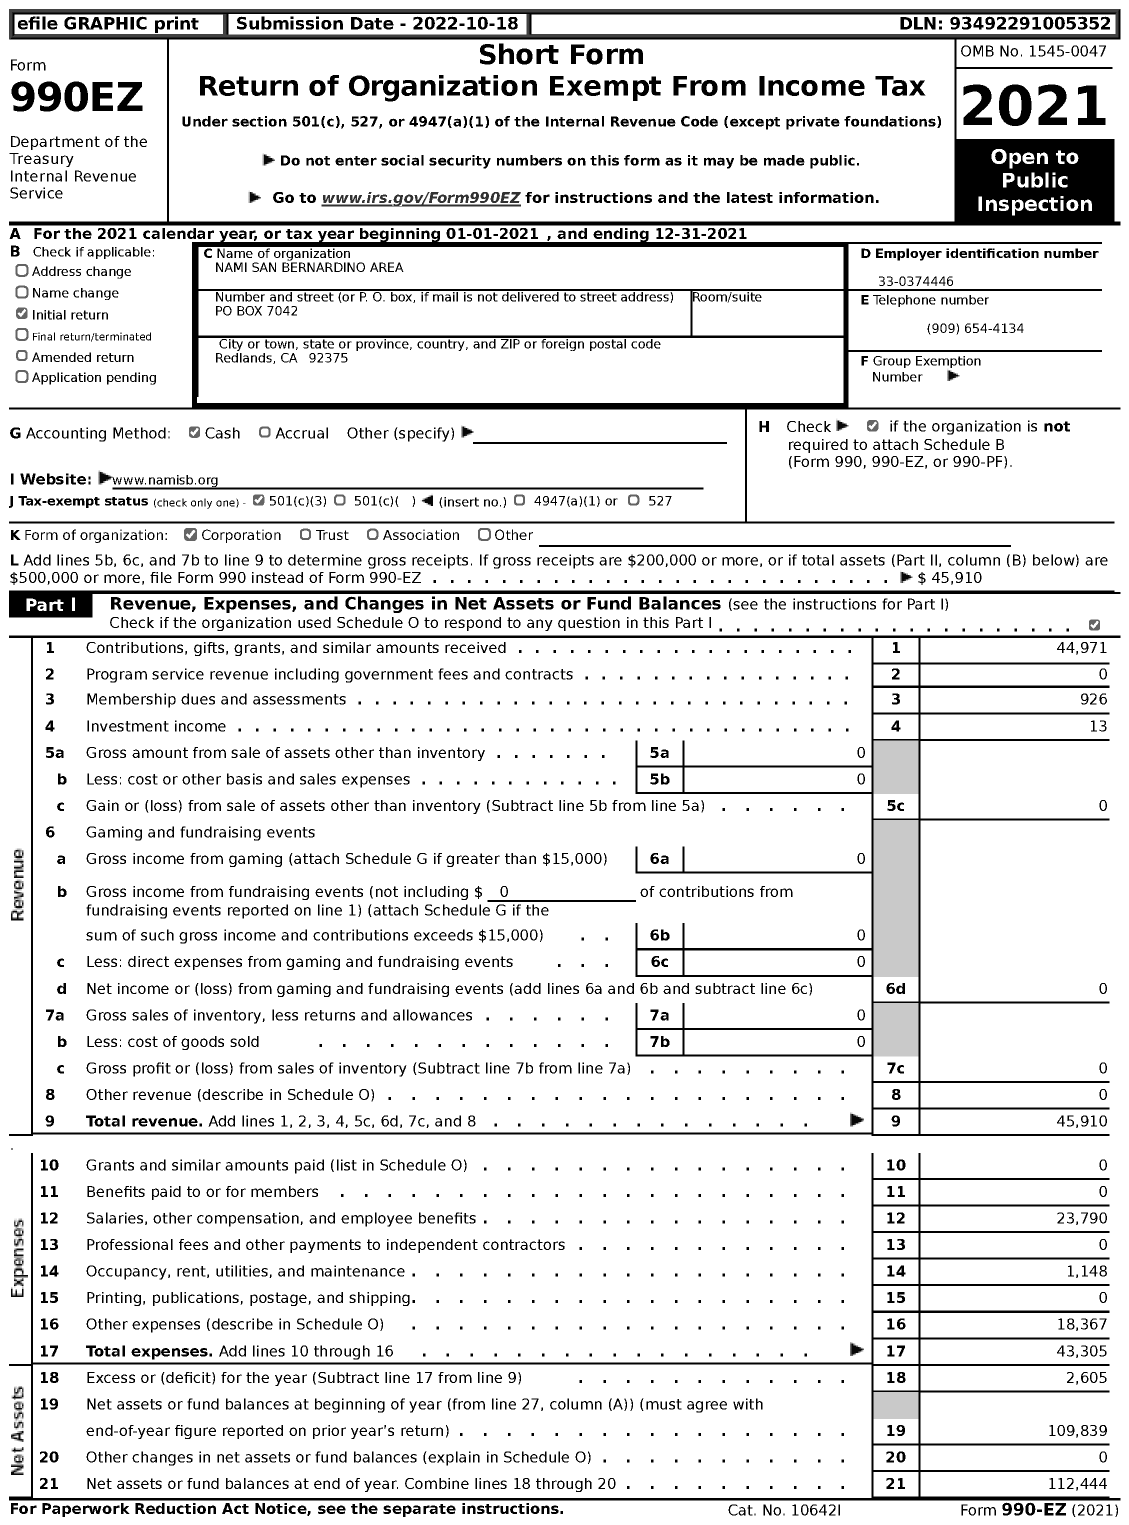 Image of first page of 2021 Form 990EZ for Nami San BERNARDINO AREa